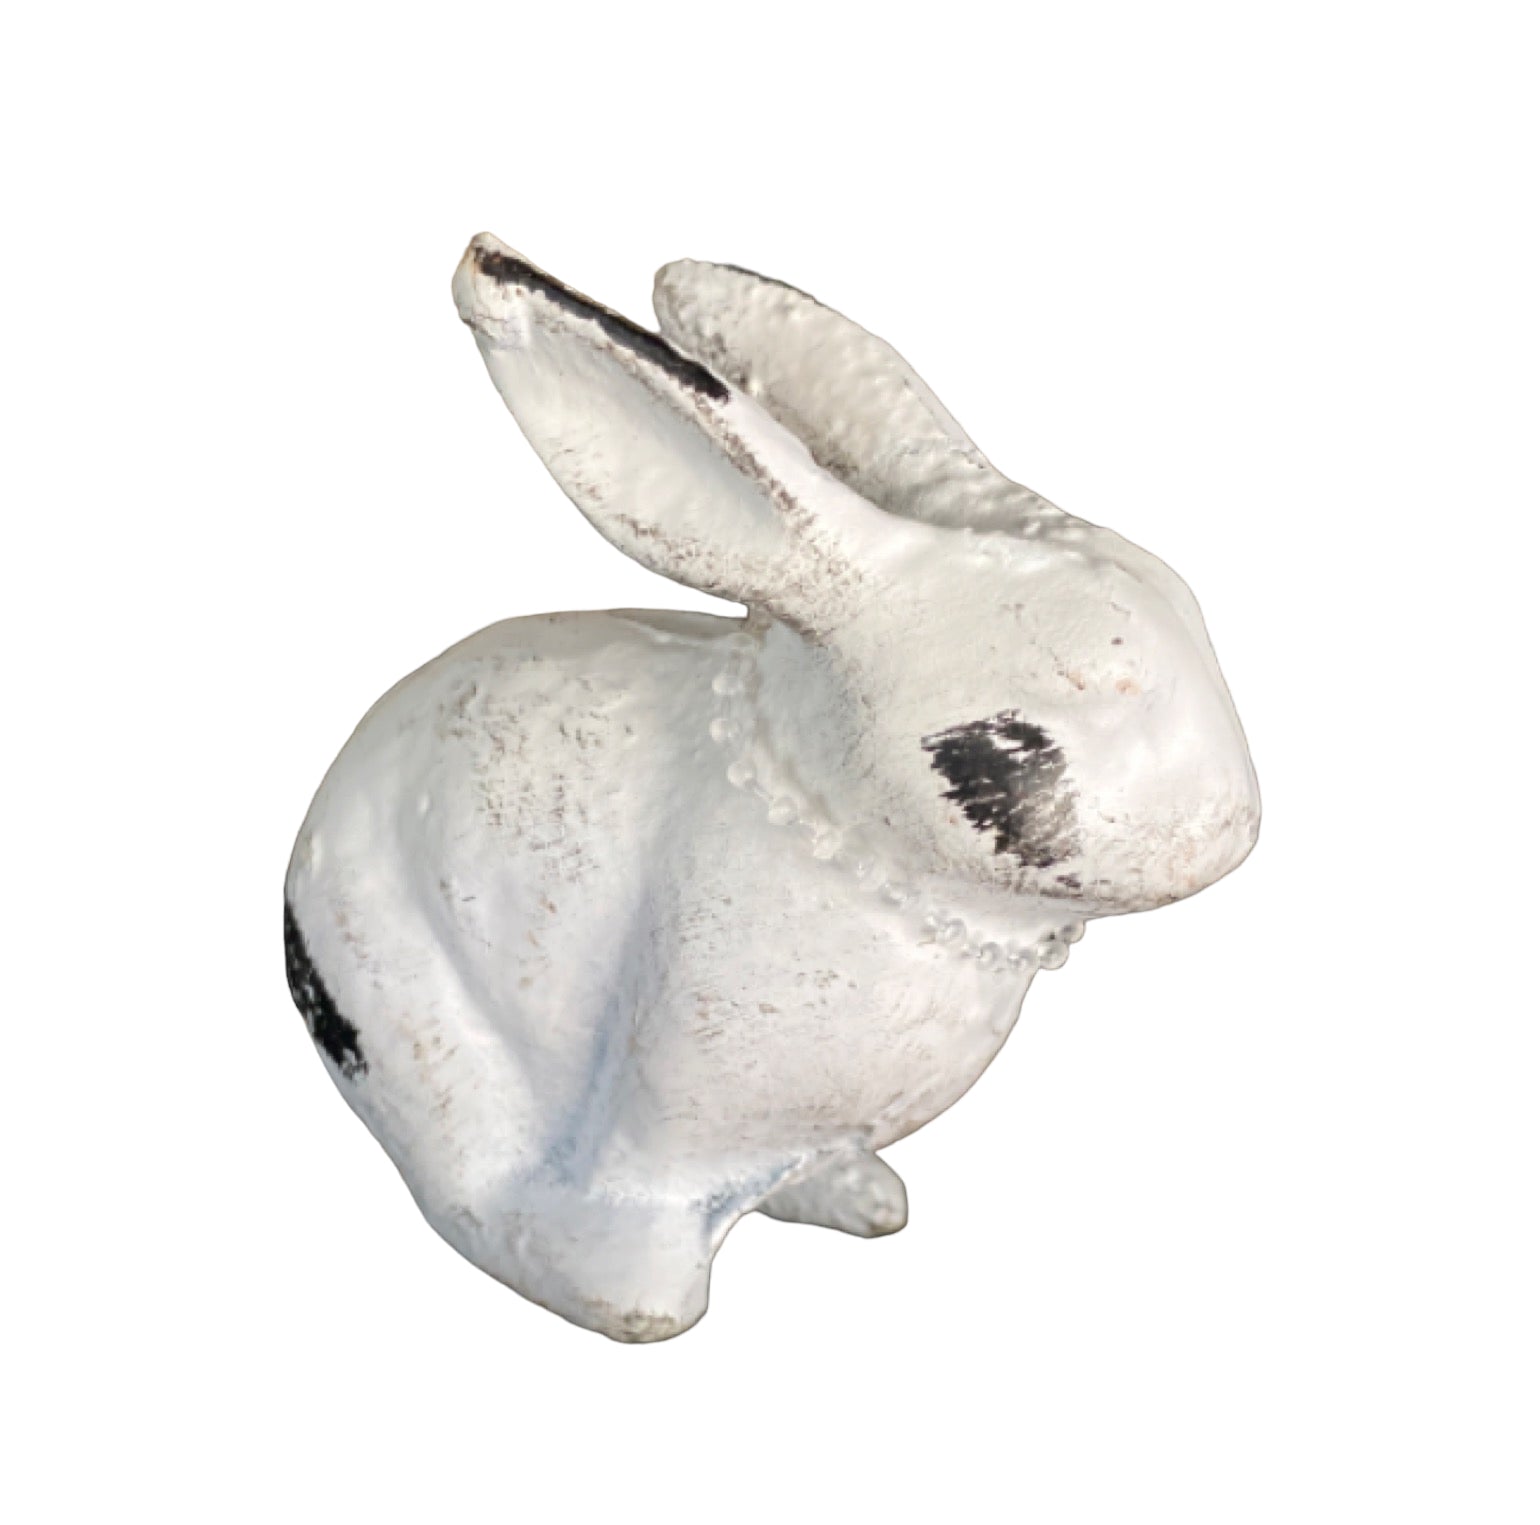 Rabbit Cast Iron Antique White Ornament - The Renmy Store Homewares & Gifts 